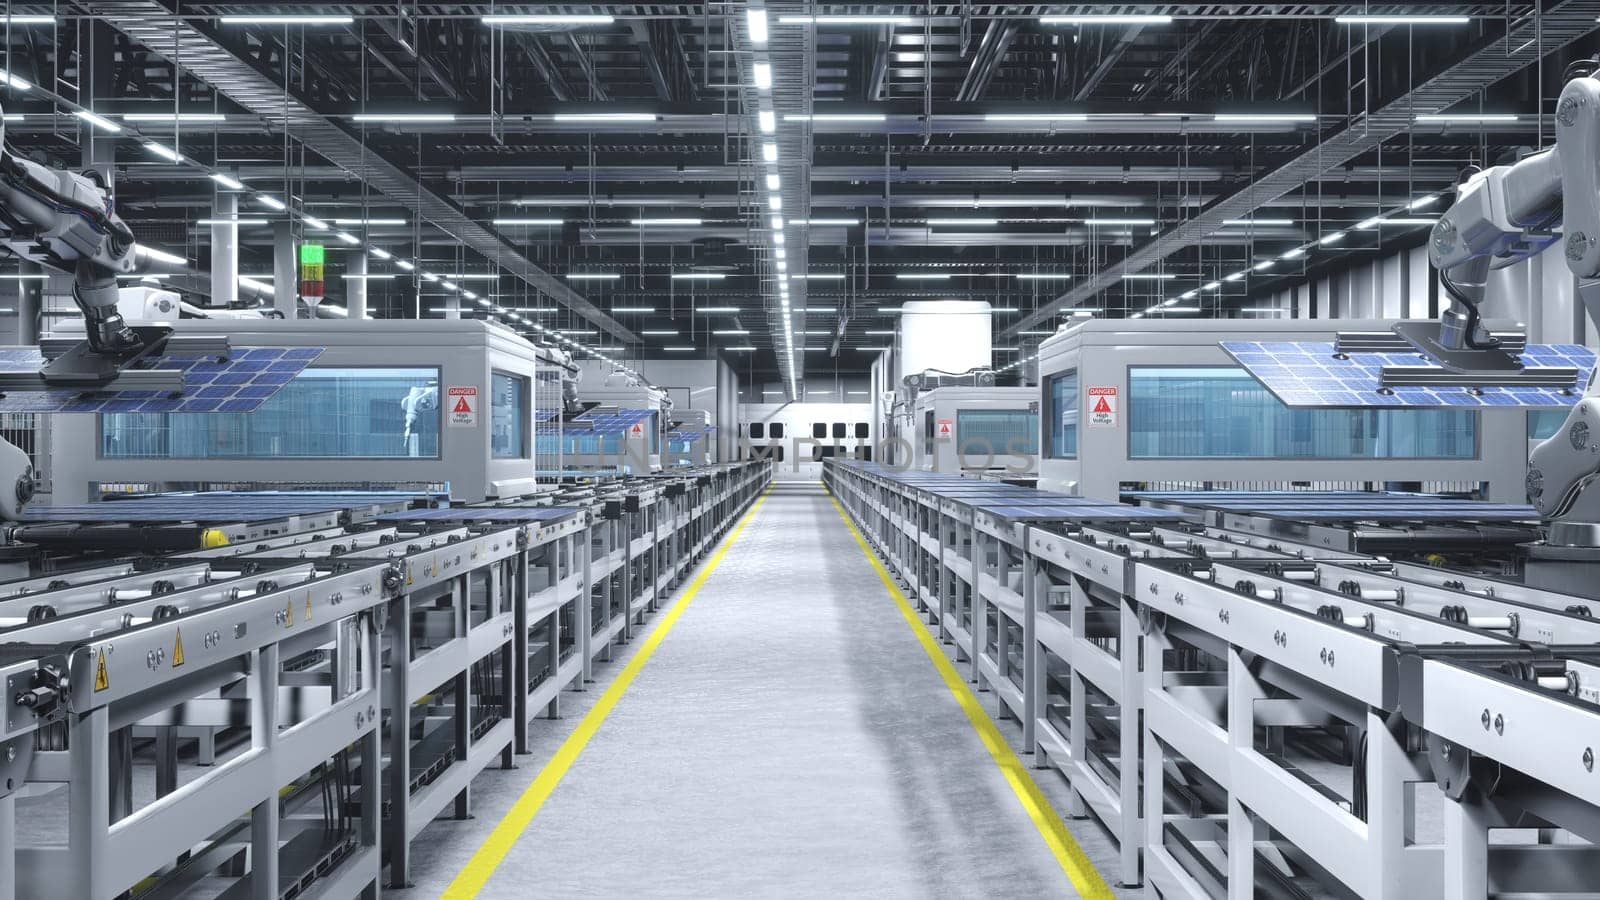 Solar panels being moved on conveyor belts during high tech production process in clean energy factory, 3D render. PV cells used to produce solar power electricity being placed on assembly lines